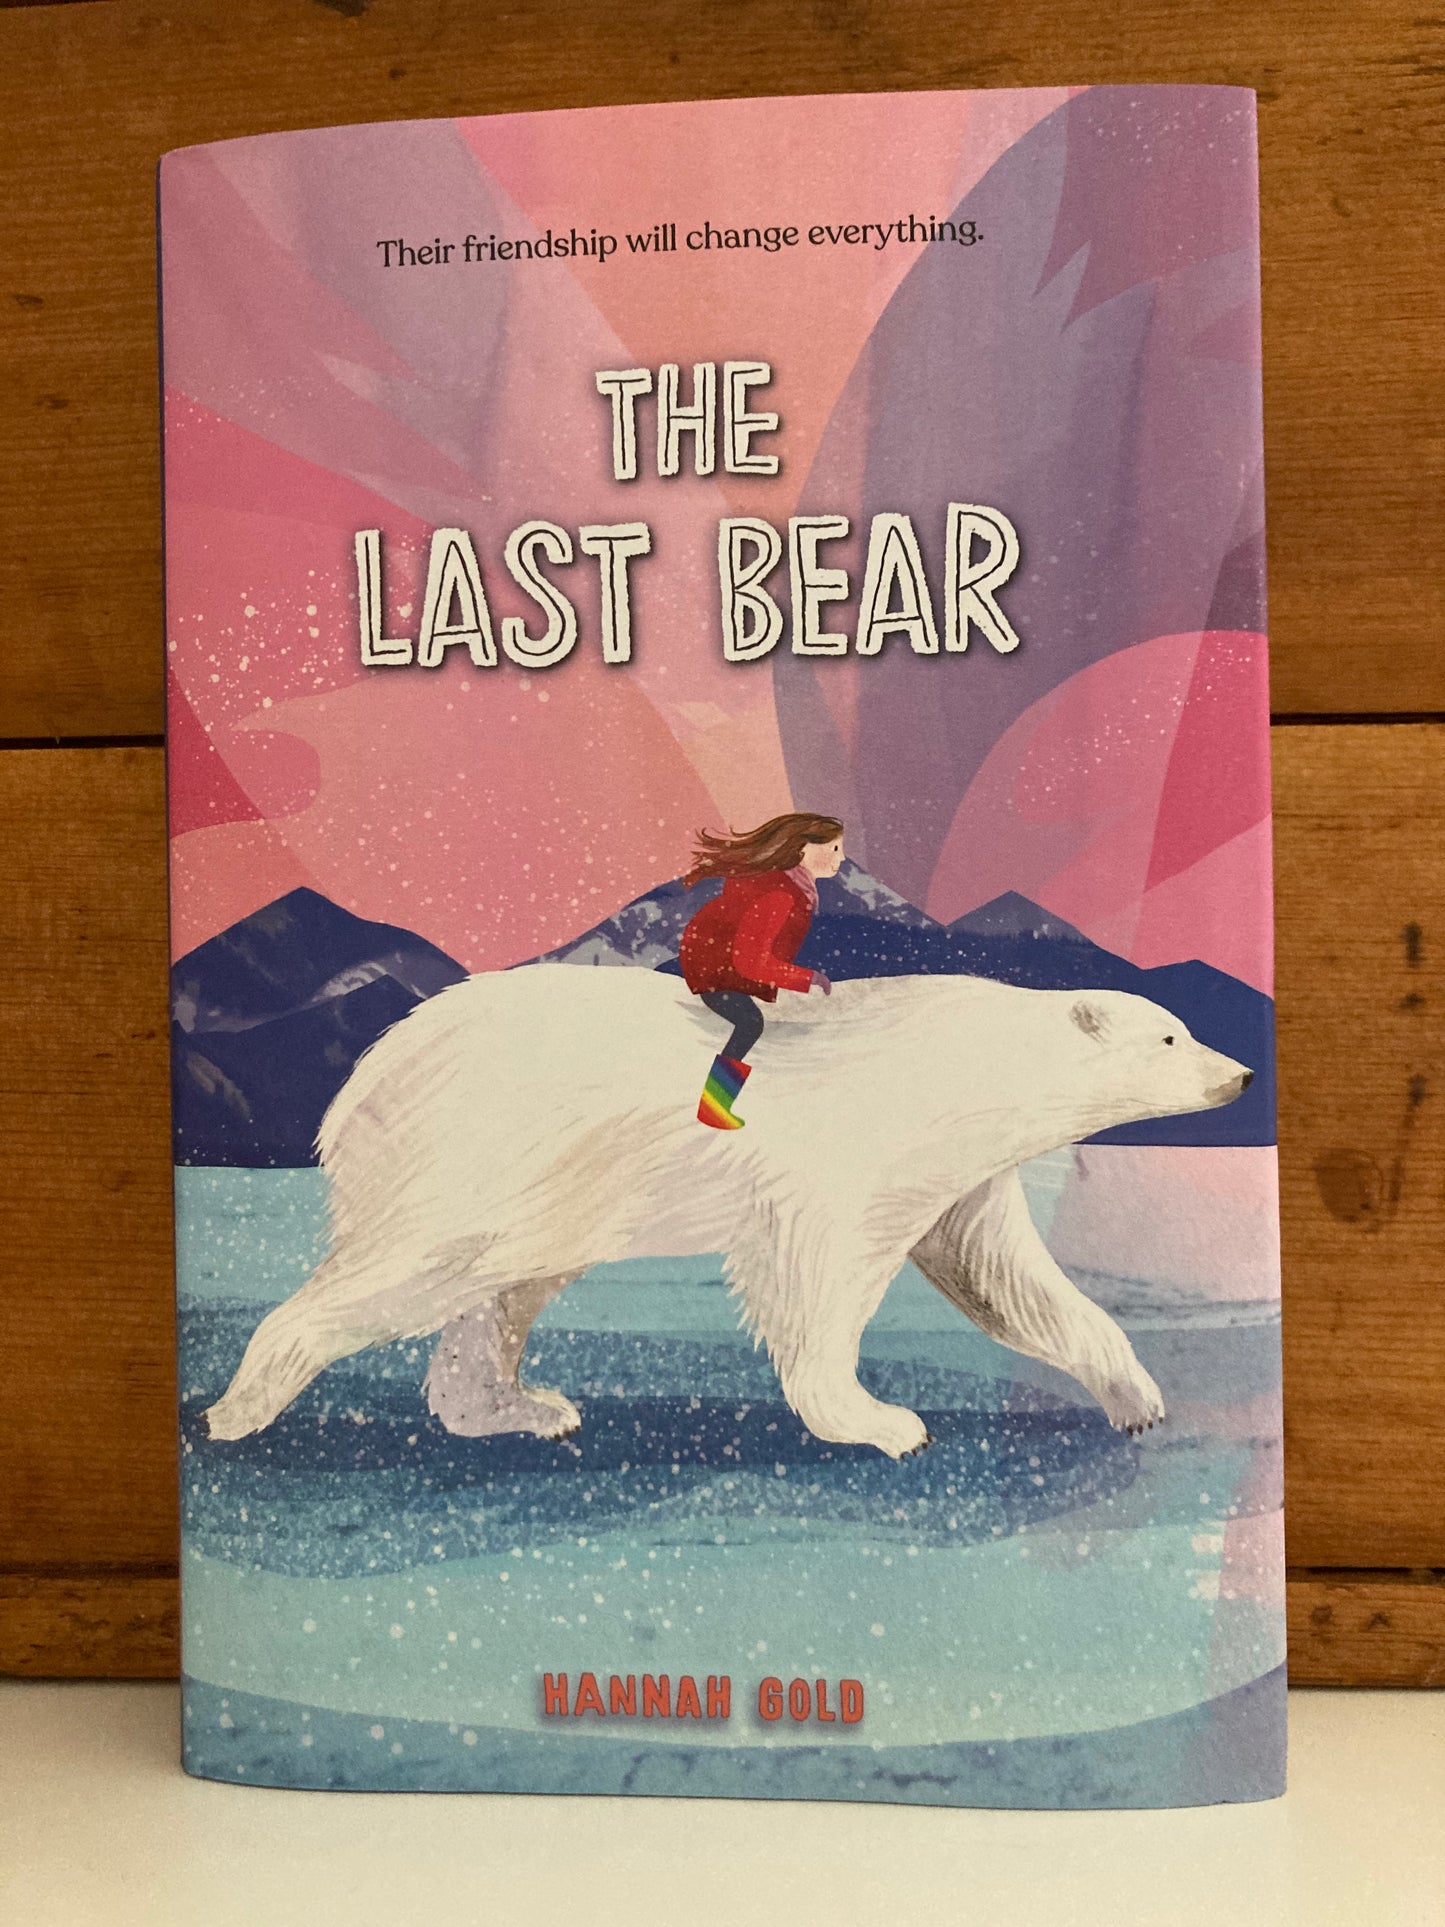 Chapter Book for Young Readers - THE LAST BEAR